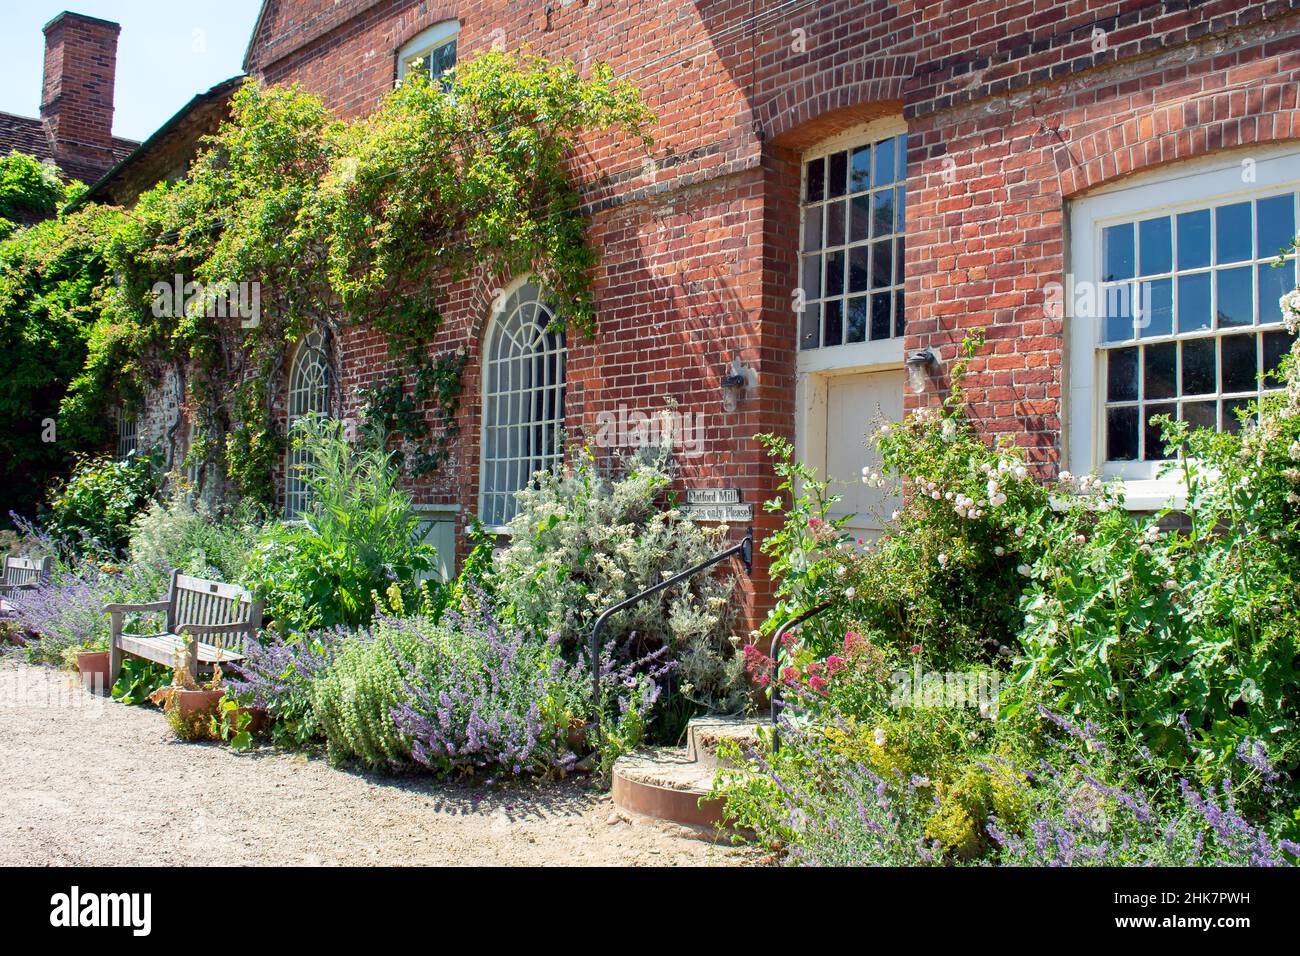 The brickwork and plants of Flatford Mill, Operated by the National Trust in Suffolk, England. A wooden bench sits amongst the foliage. Stock Photo